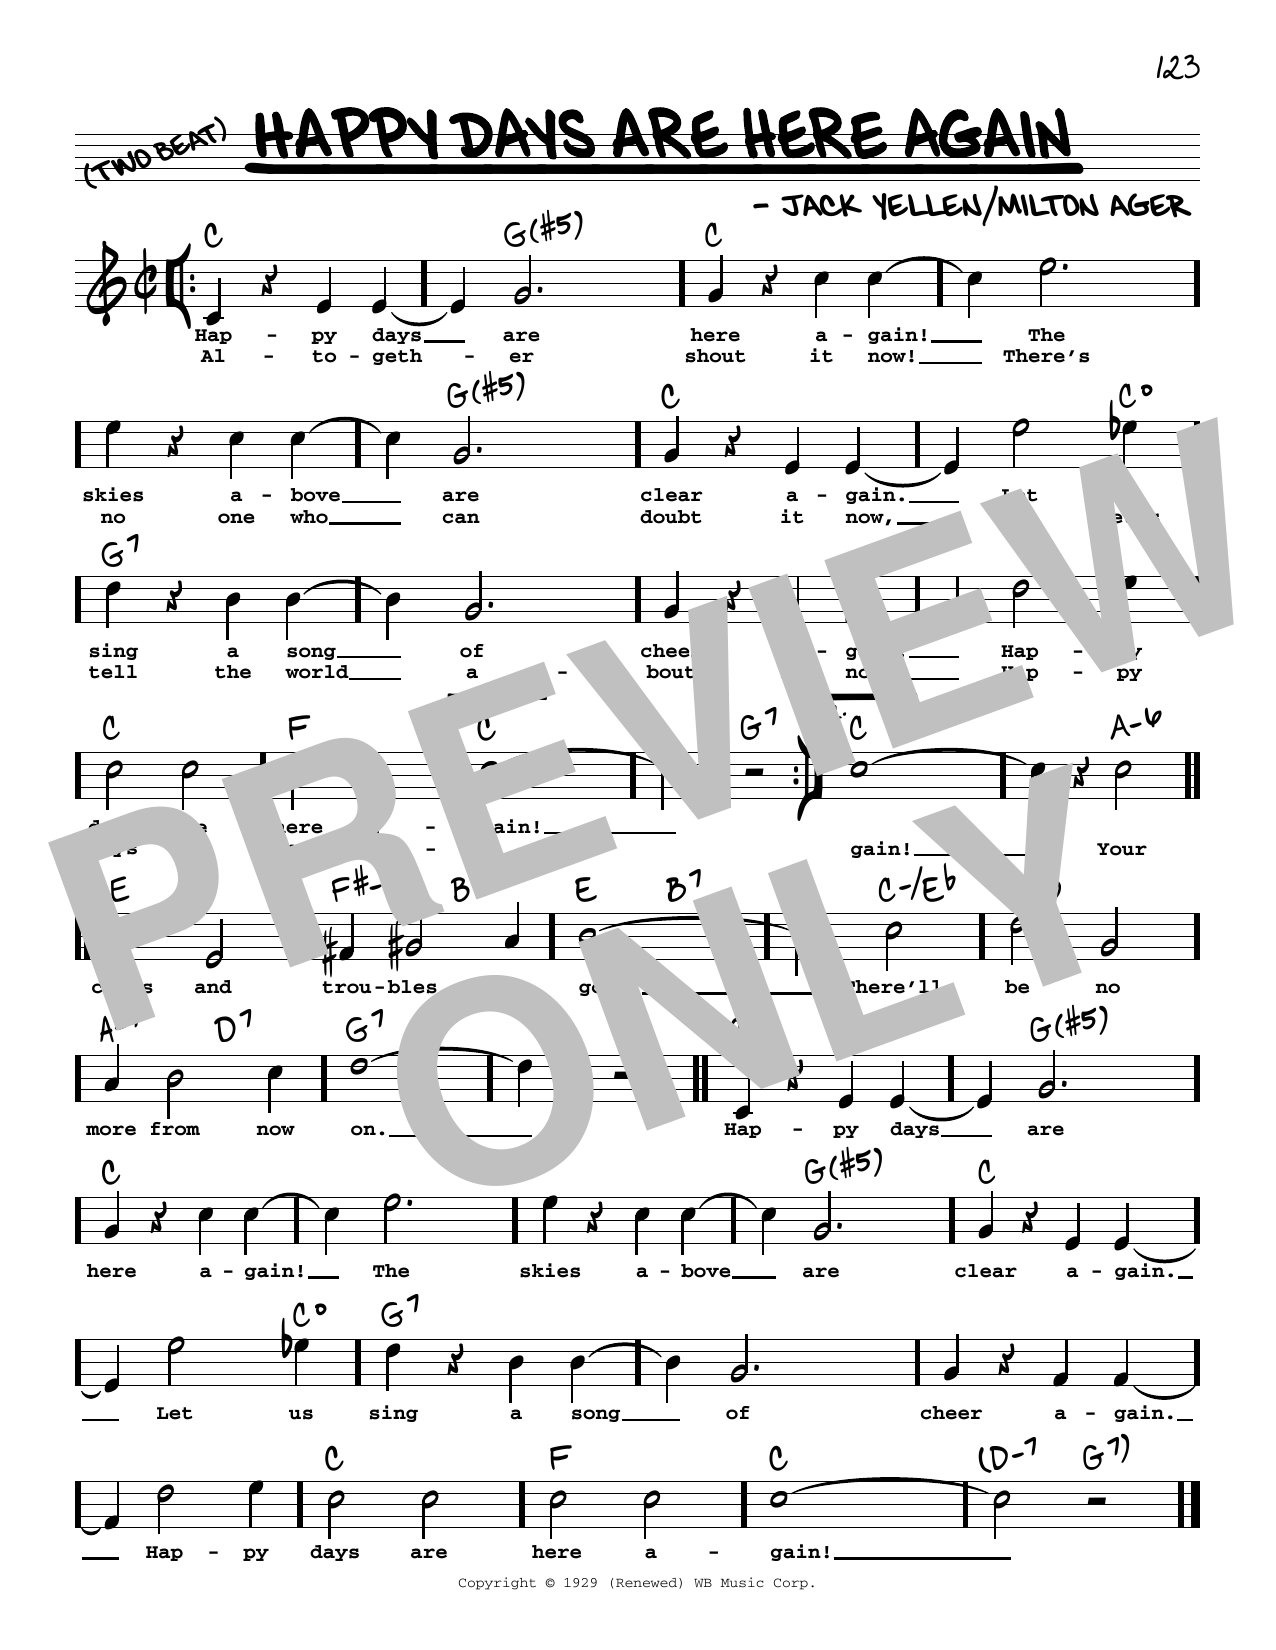 Download Jack Yellen and Milton Ager Happy Days Are Here Again (High Voice) Sheet Music